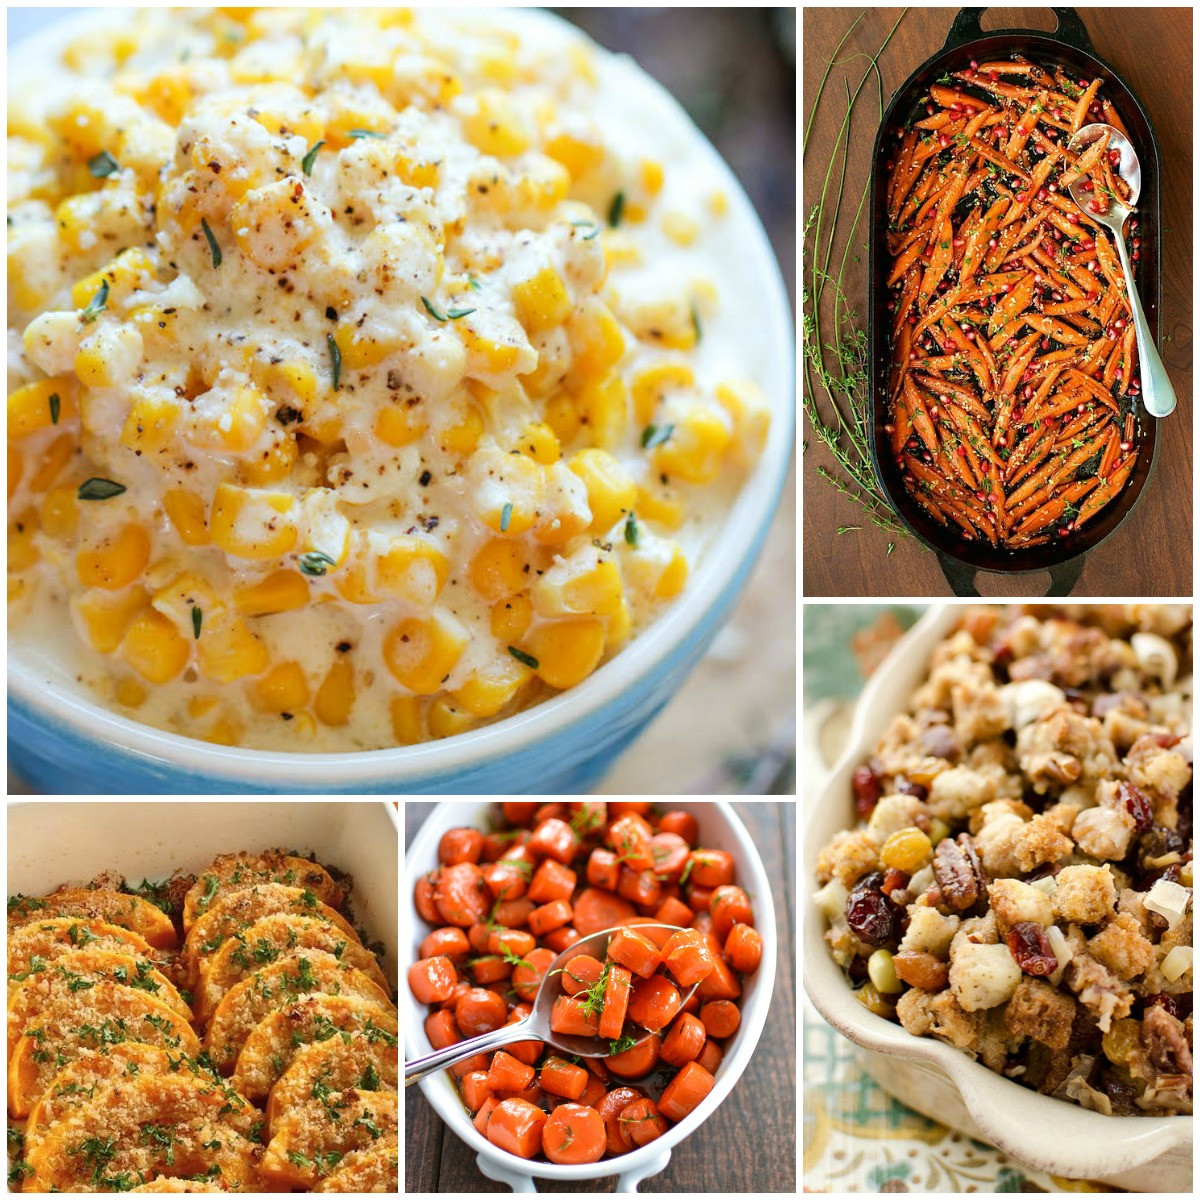 Christmas Side Dishes Recipes
 25 Most Pinned Side Dish Recipes for Thanksgiving and